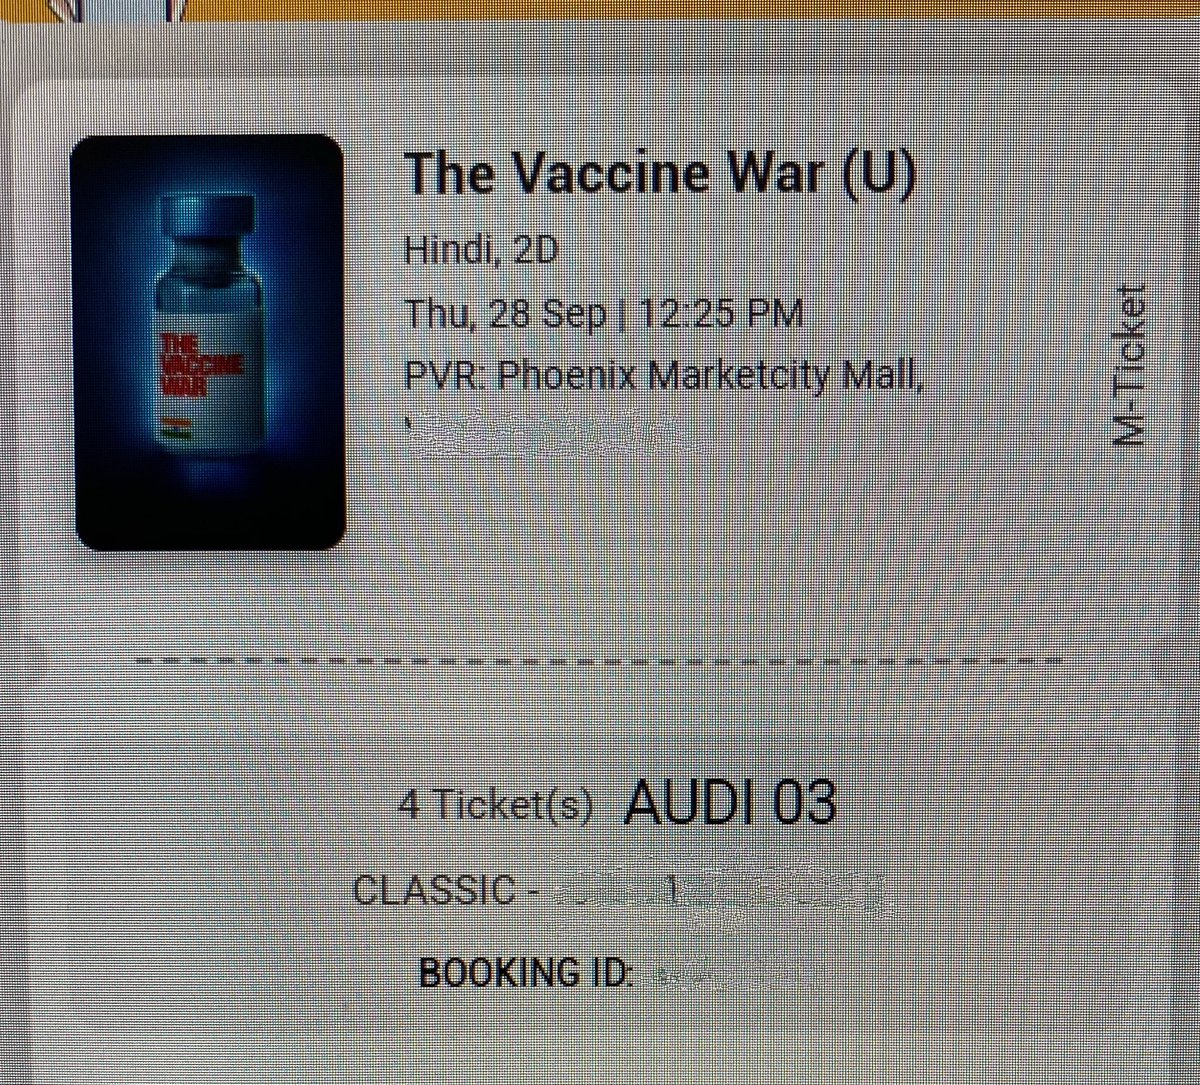 #TheVaccineWarAdvanceBooking #TheVaccineWar #indiacandoit @vivekagnihotri looking forward to this amazing feat by Indian Scientists! For the first time going for first day show!